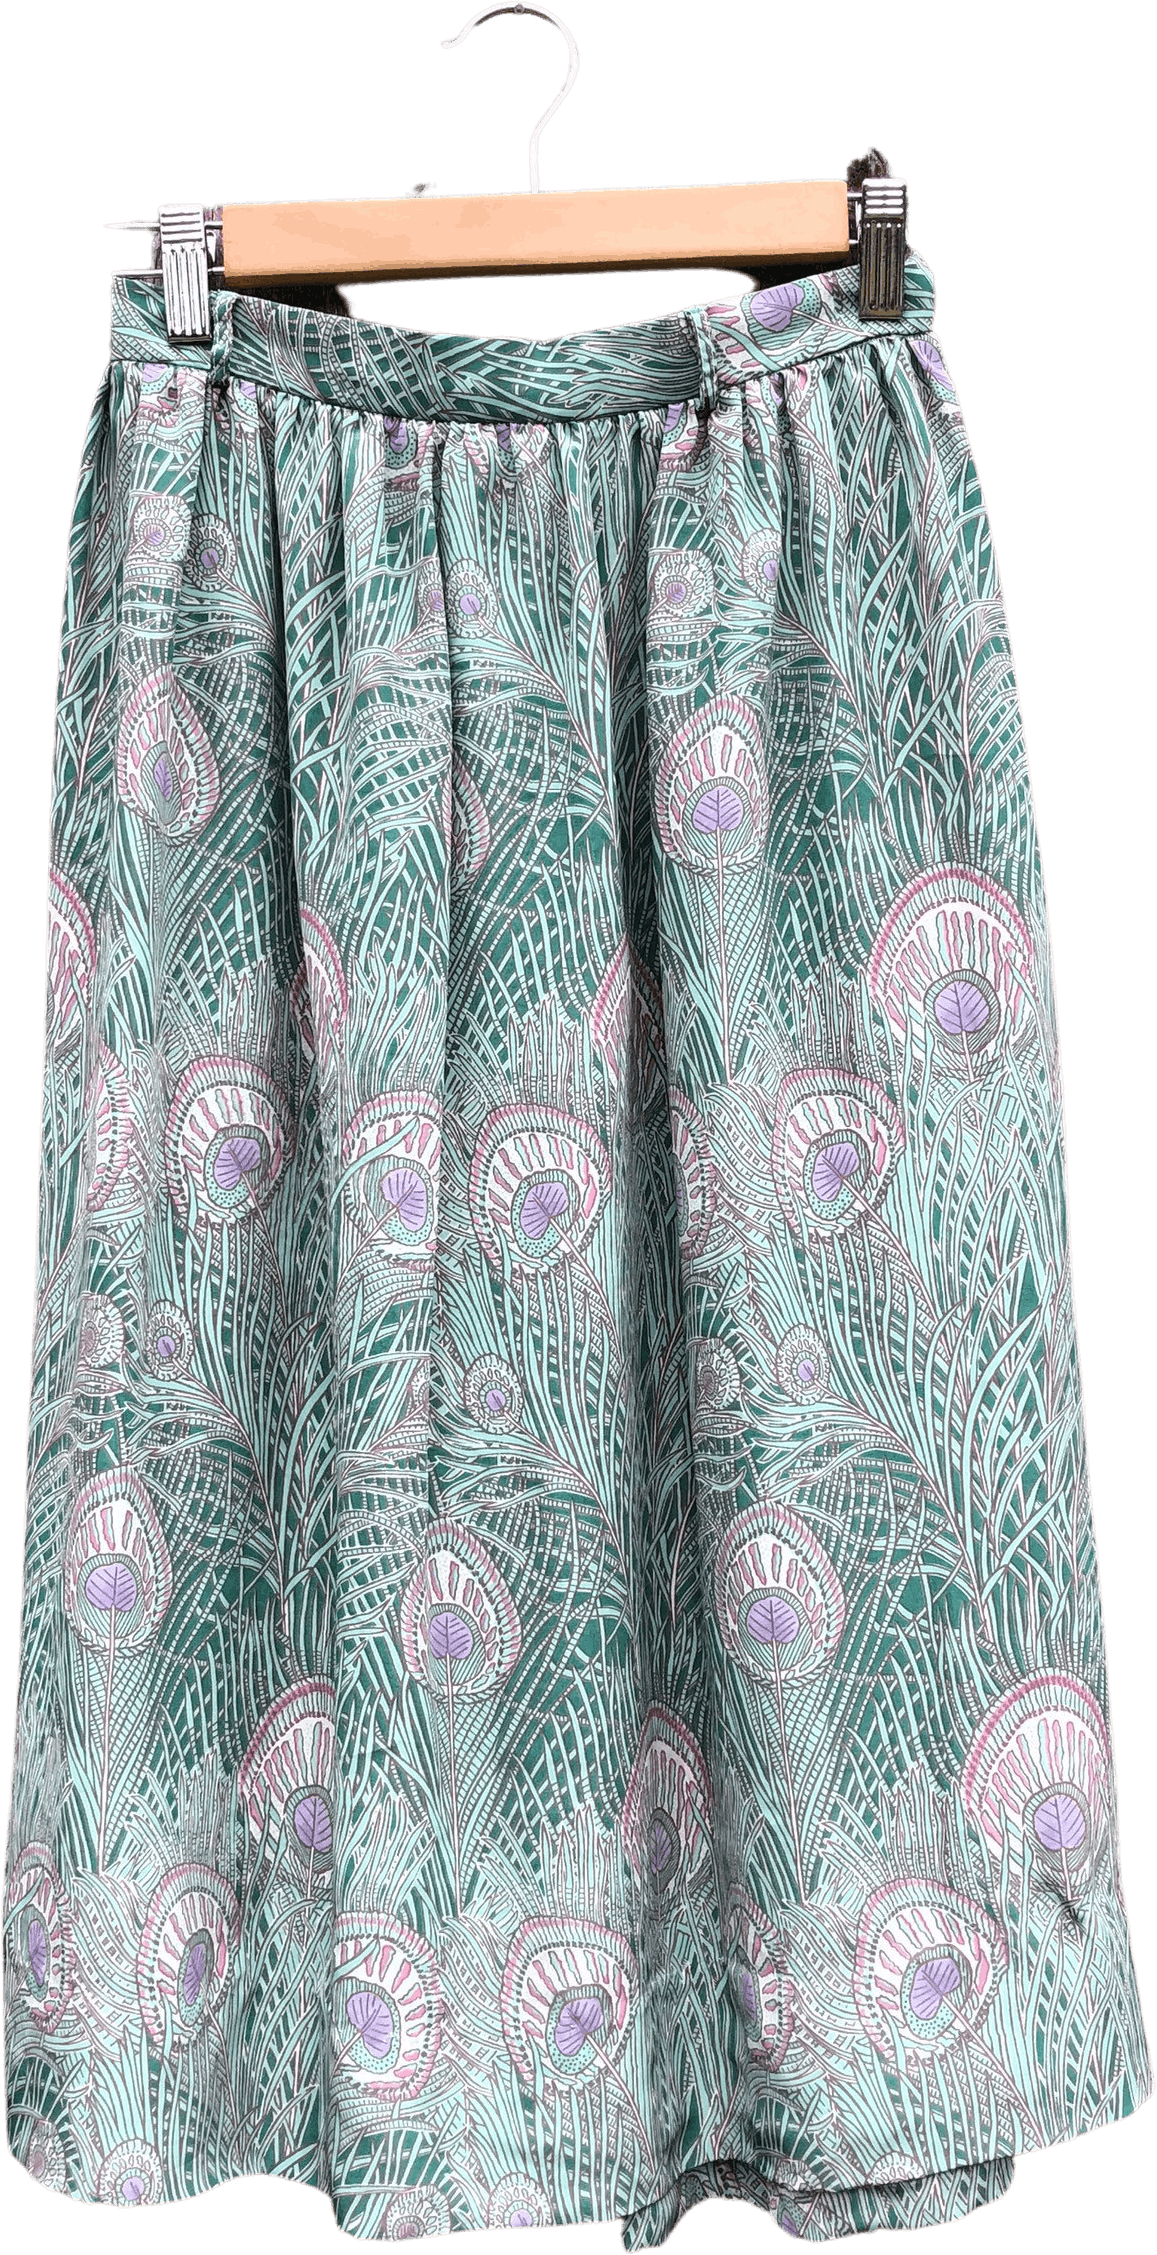 Vintage 80's/90's Light Teal Peacock Feather Print Skirt with Pockets ...